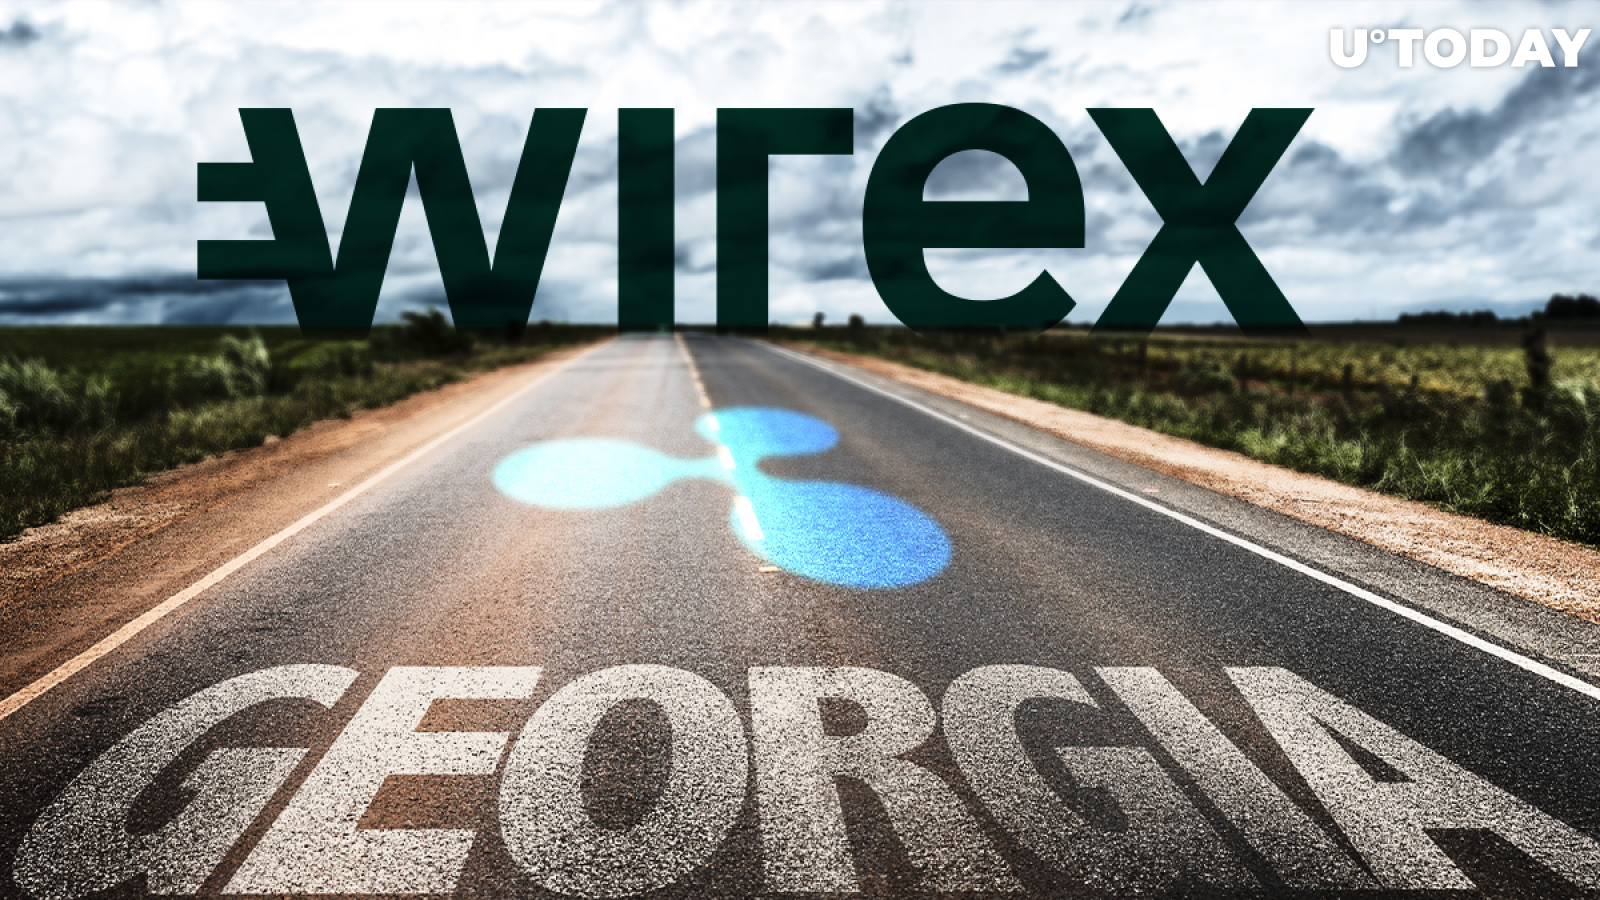 Ripple’s Partner Wirex Granted Its First License for Money Transmission in US: State of Georgia